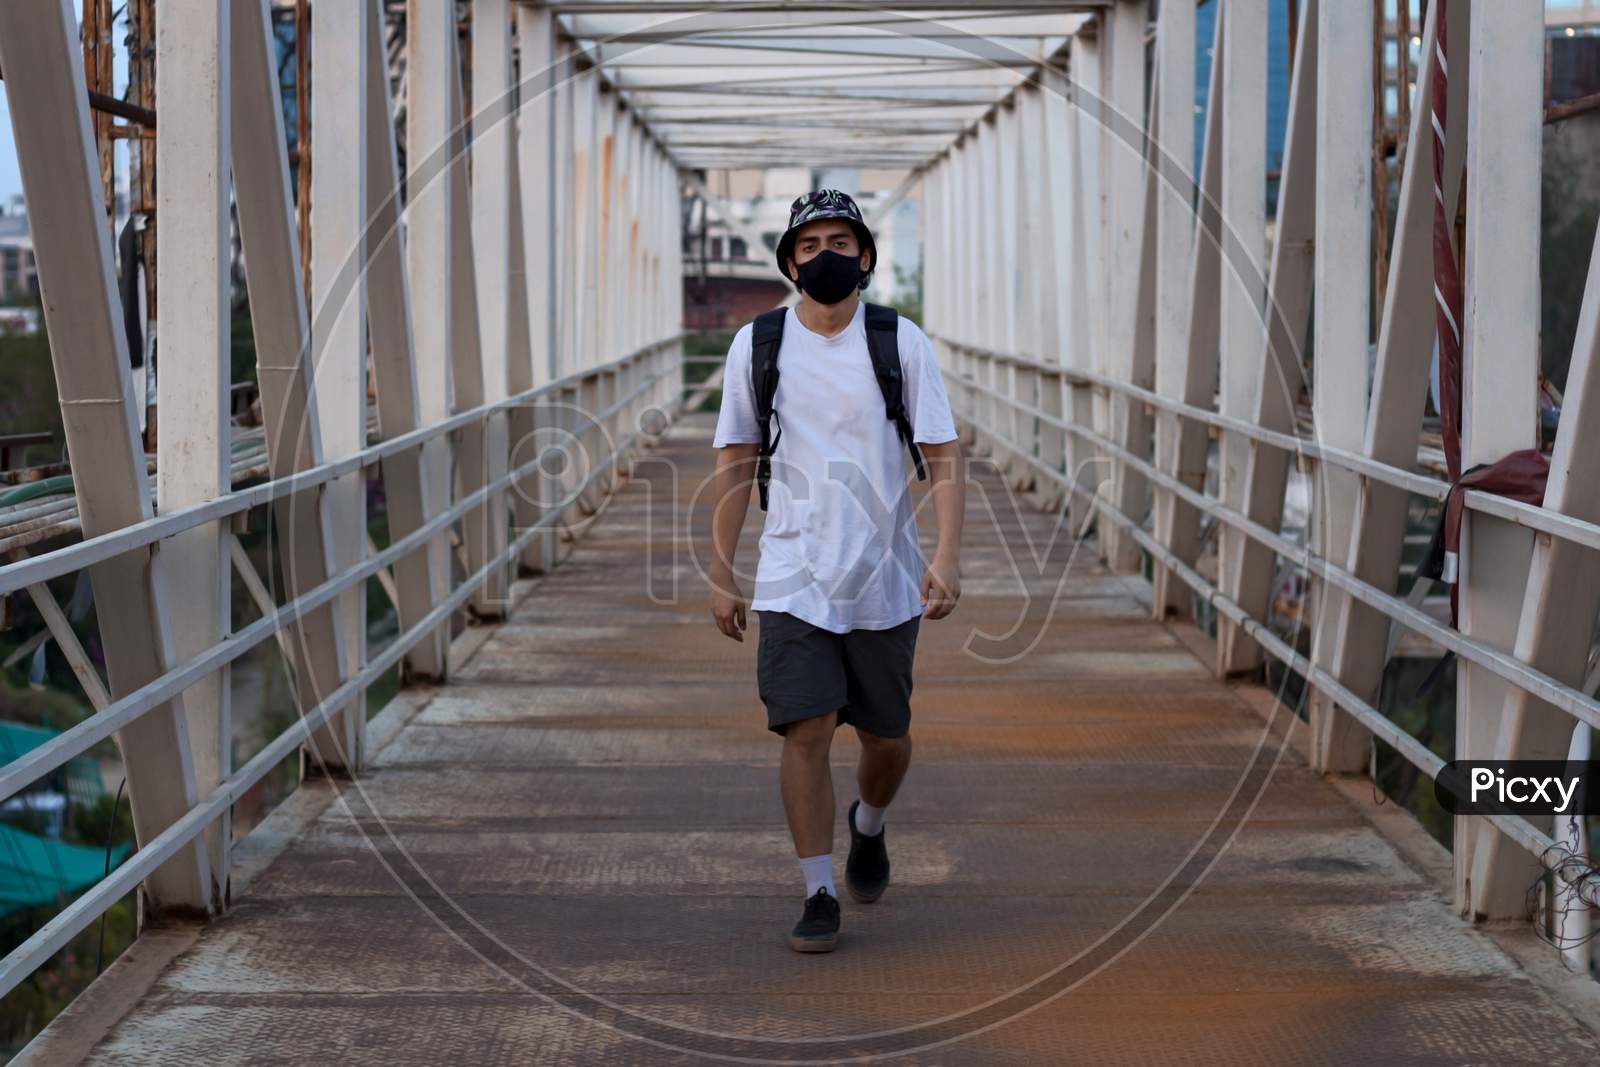 Young Millennial Walking On An Empty Metal Foot Bridge Outdoors While Wearing A Black Protective Face Mask To Prevent Covid-19 Virus Infection In A City. The New Normal.